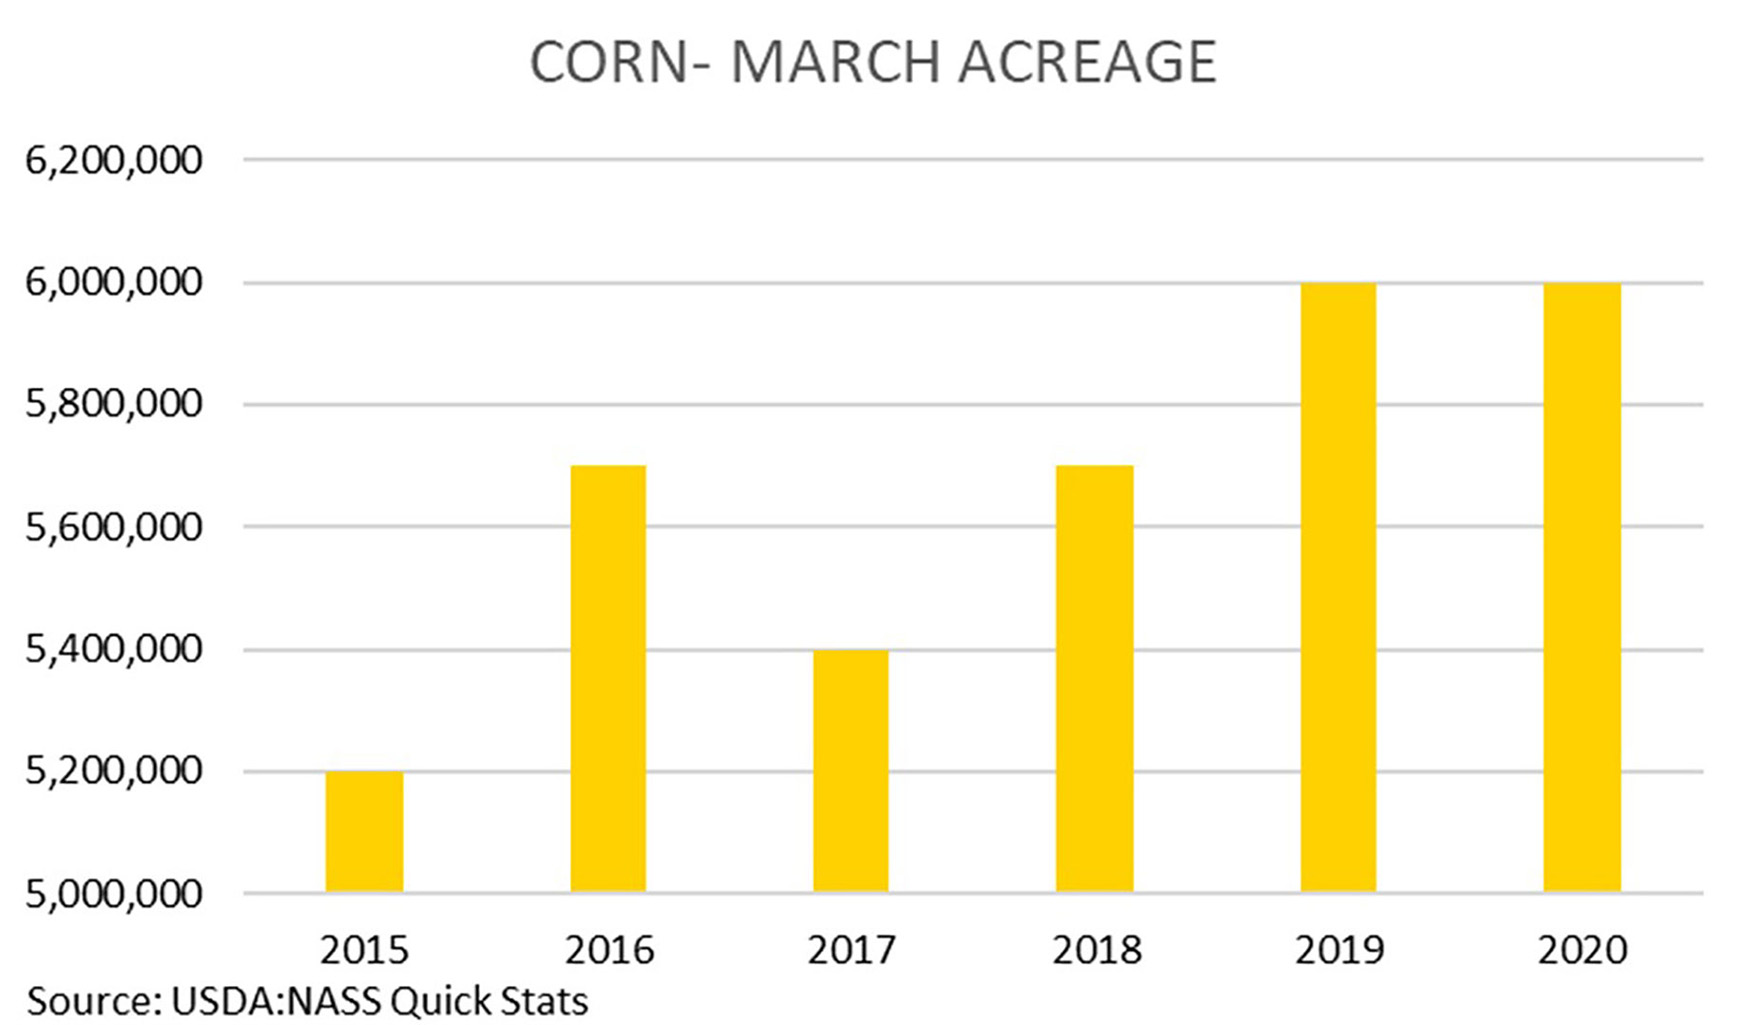 A bar graph displaying corn planting intentions from 2015 to 2016. The years 2019 and 2020 both show 6,000,000 acres. For a complete description, call SDSU Extension at 605-688-6729.